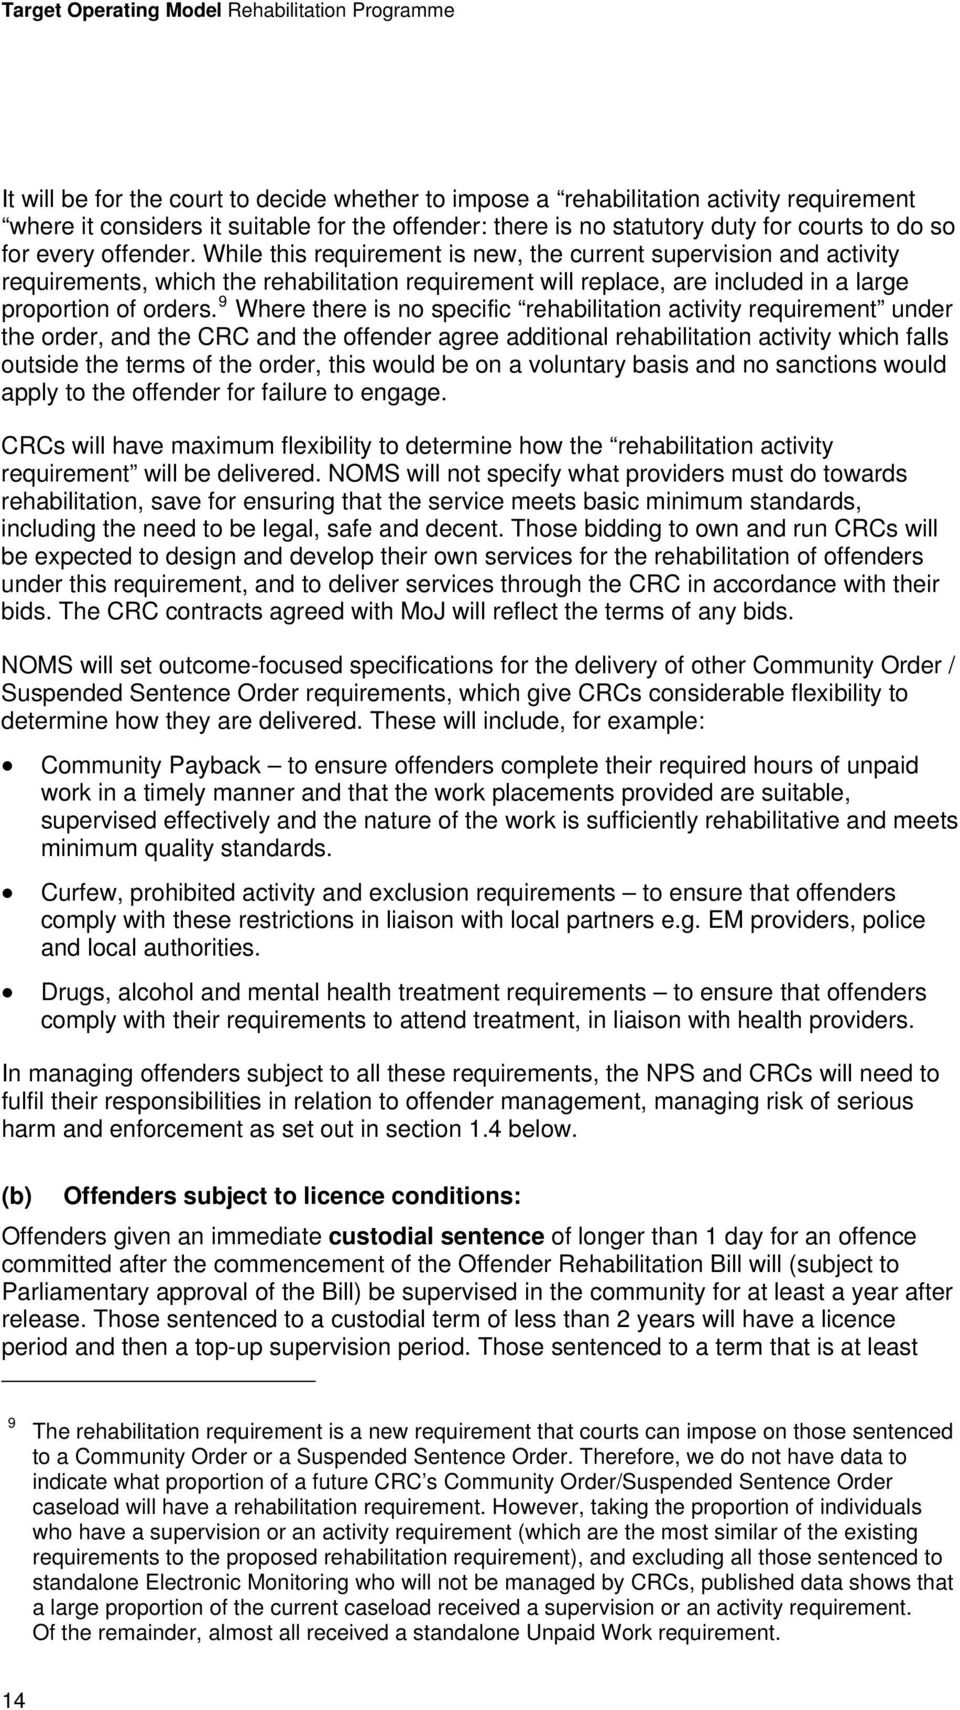 9 Where there is no specific rehabilitation activity requirement under the order, and the CRC and the offender agree additional rehabilitation activity which falls outside the terms of the order,